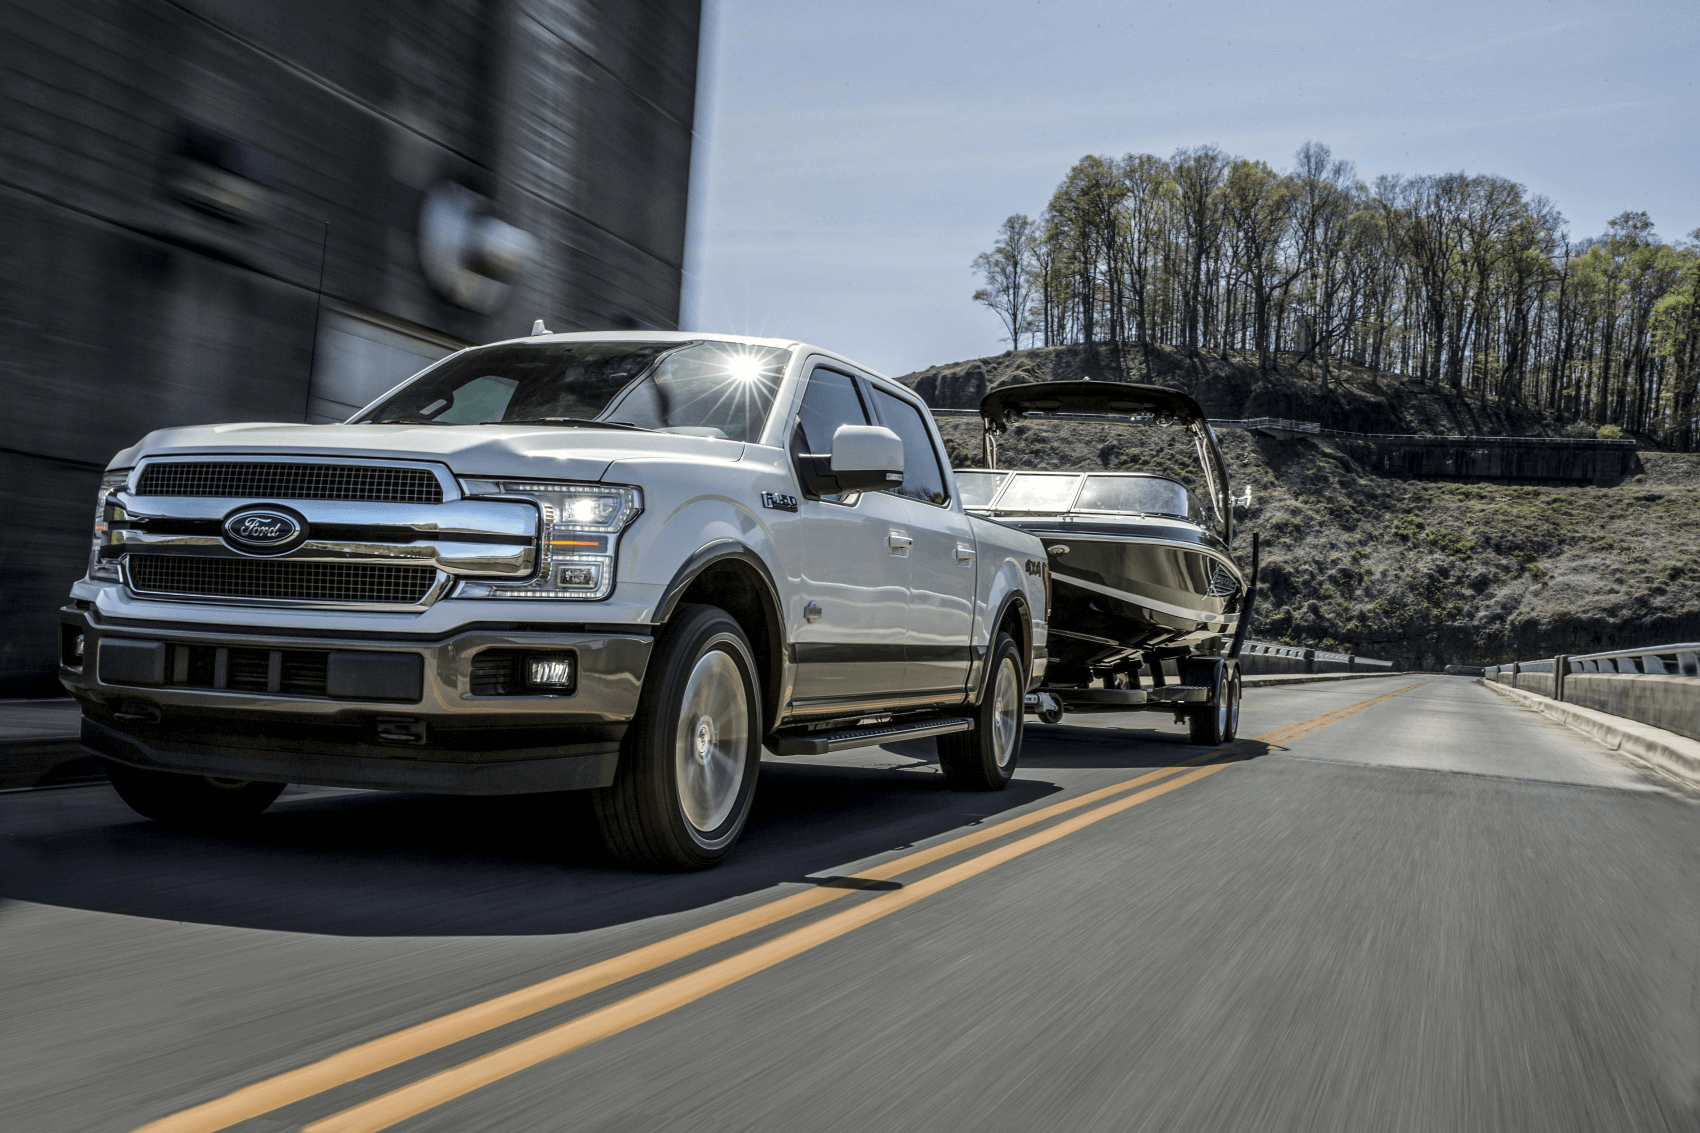 2019 Ford F-150 Silver Towing Boat